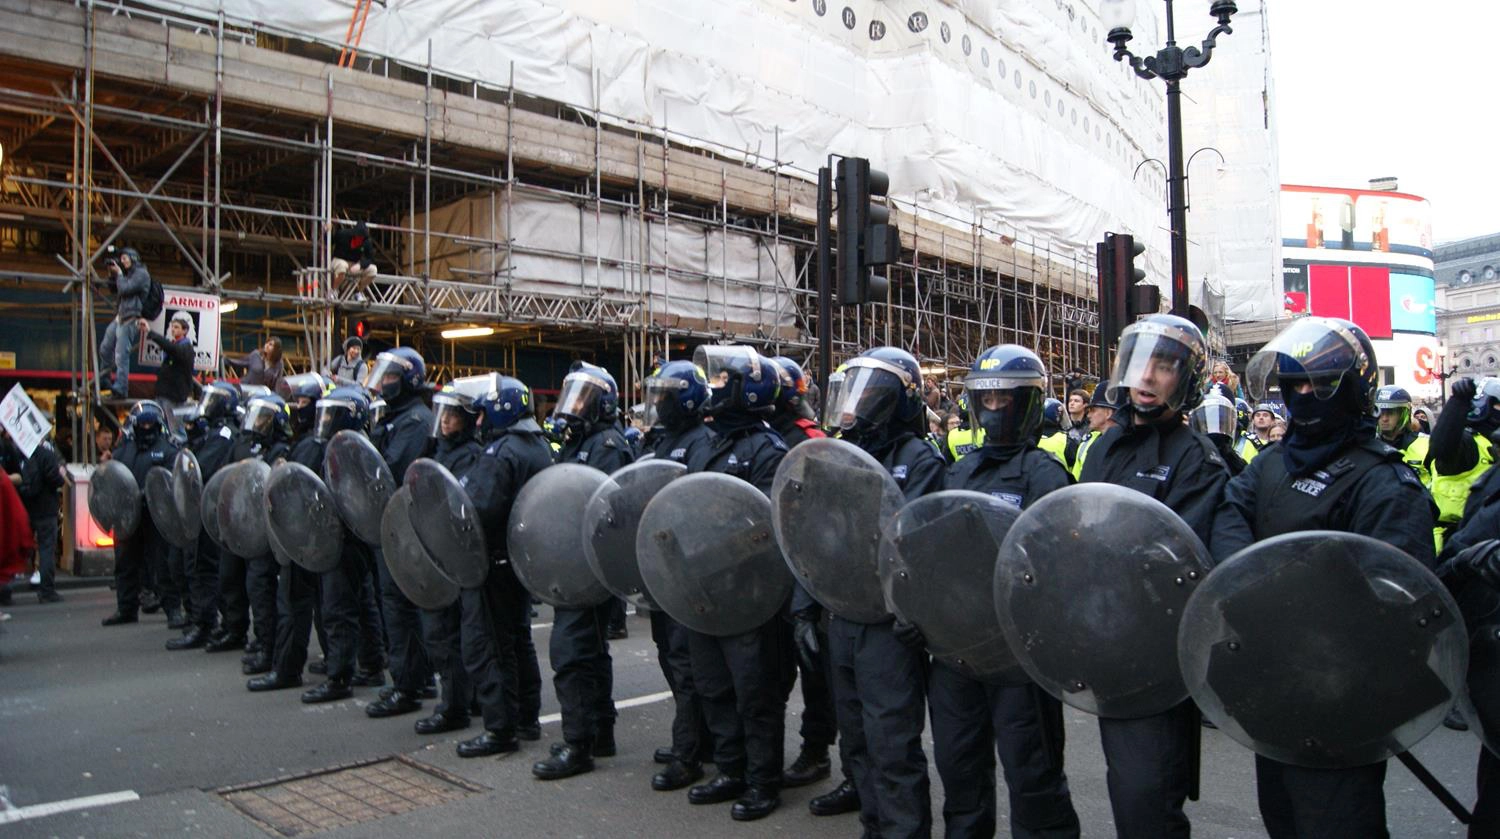 London Photography of Police in Riot Gear by MAKSAM Photography